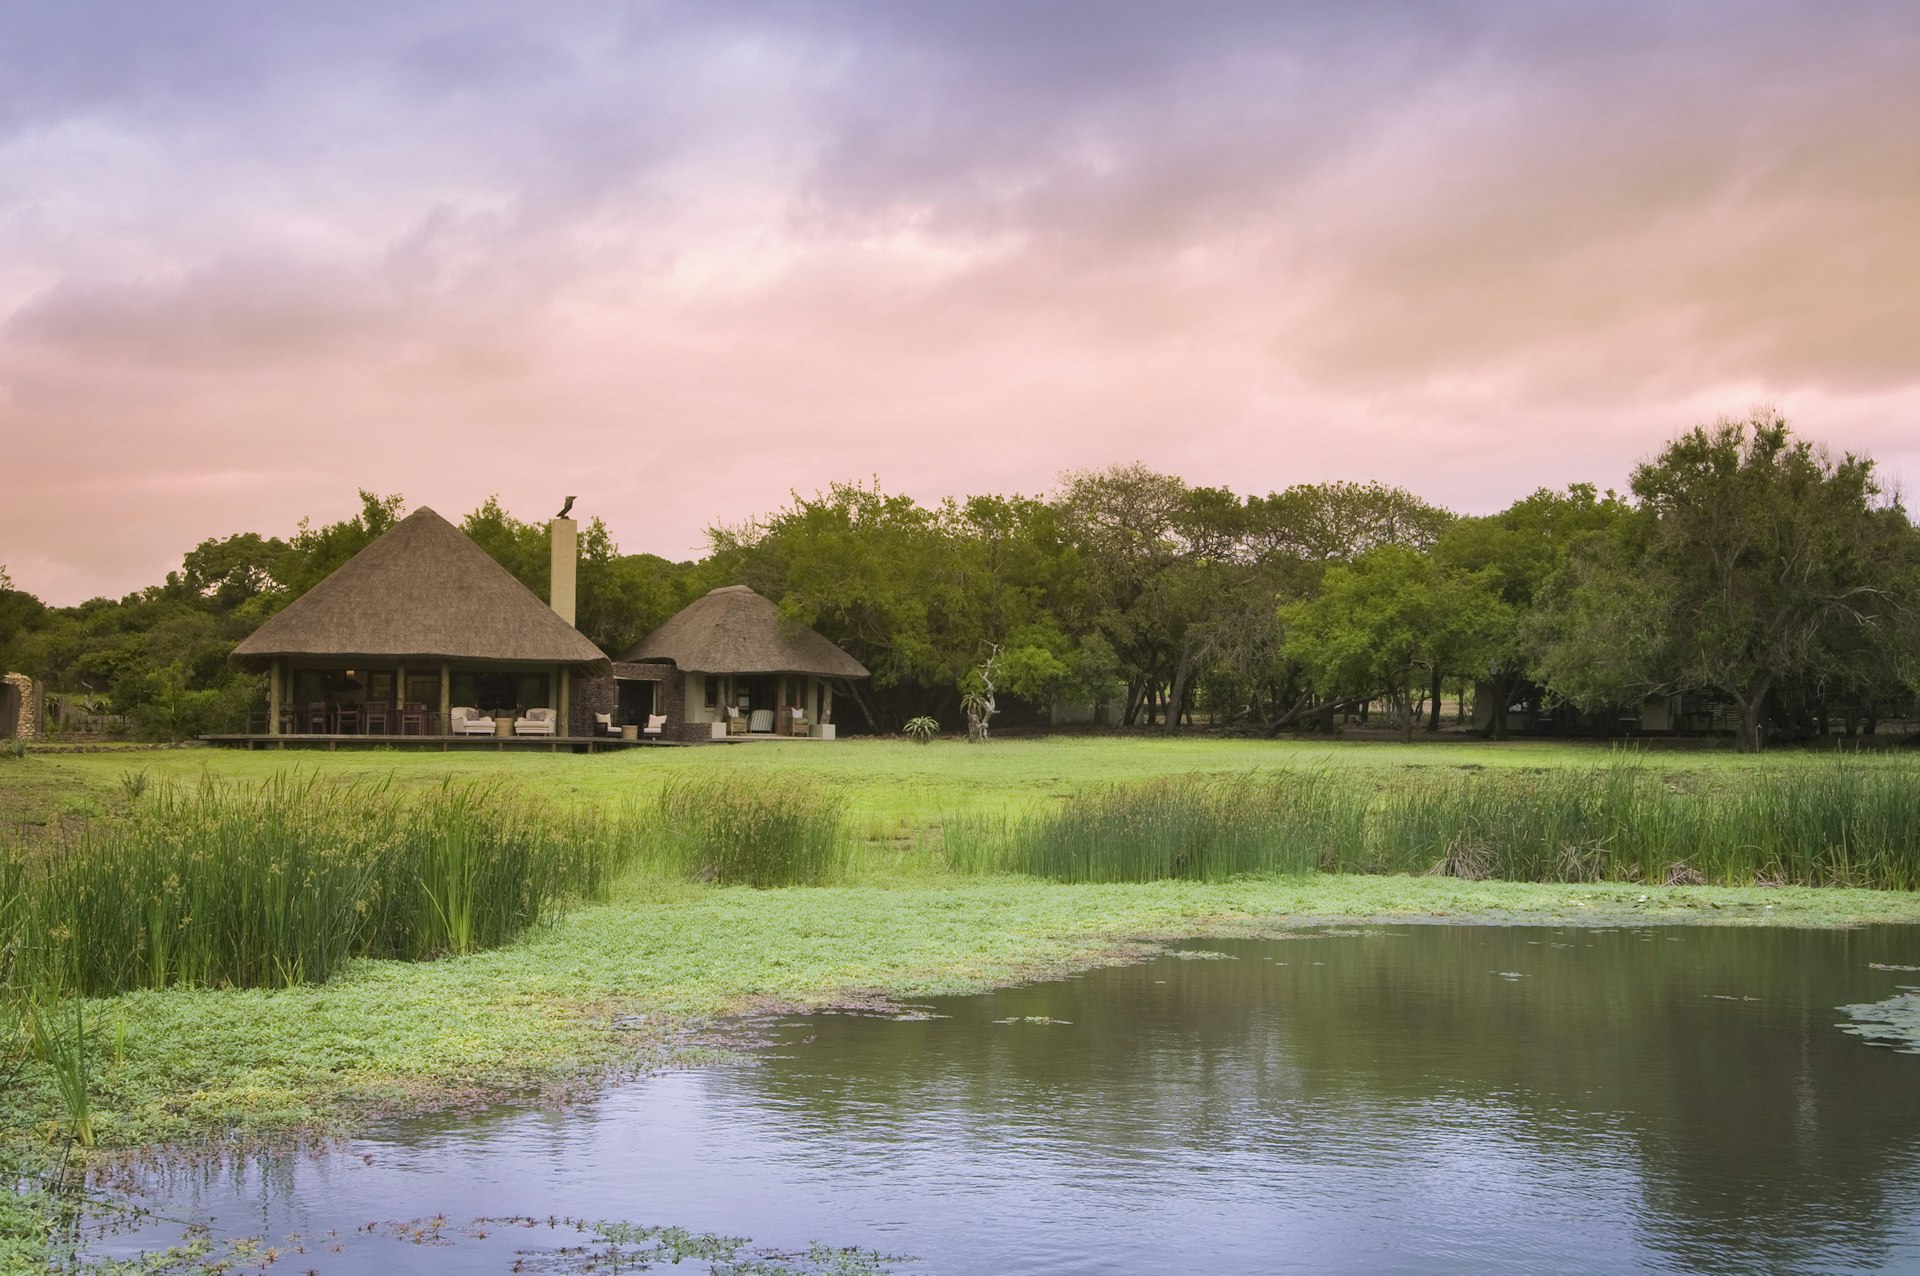 Luxury huts stand near water at a game reserve